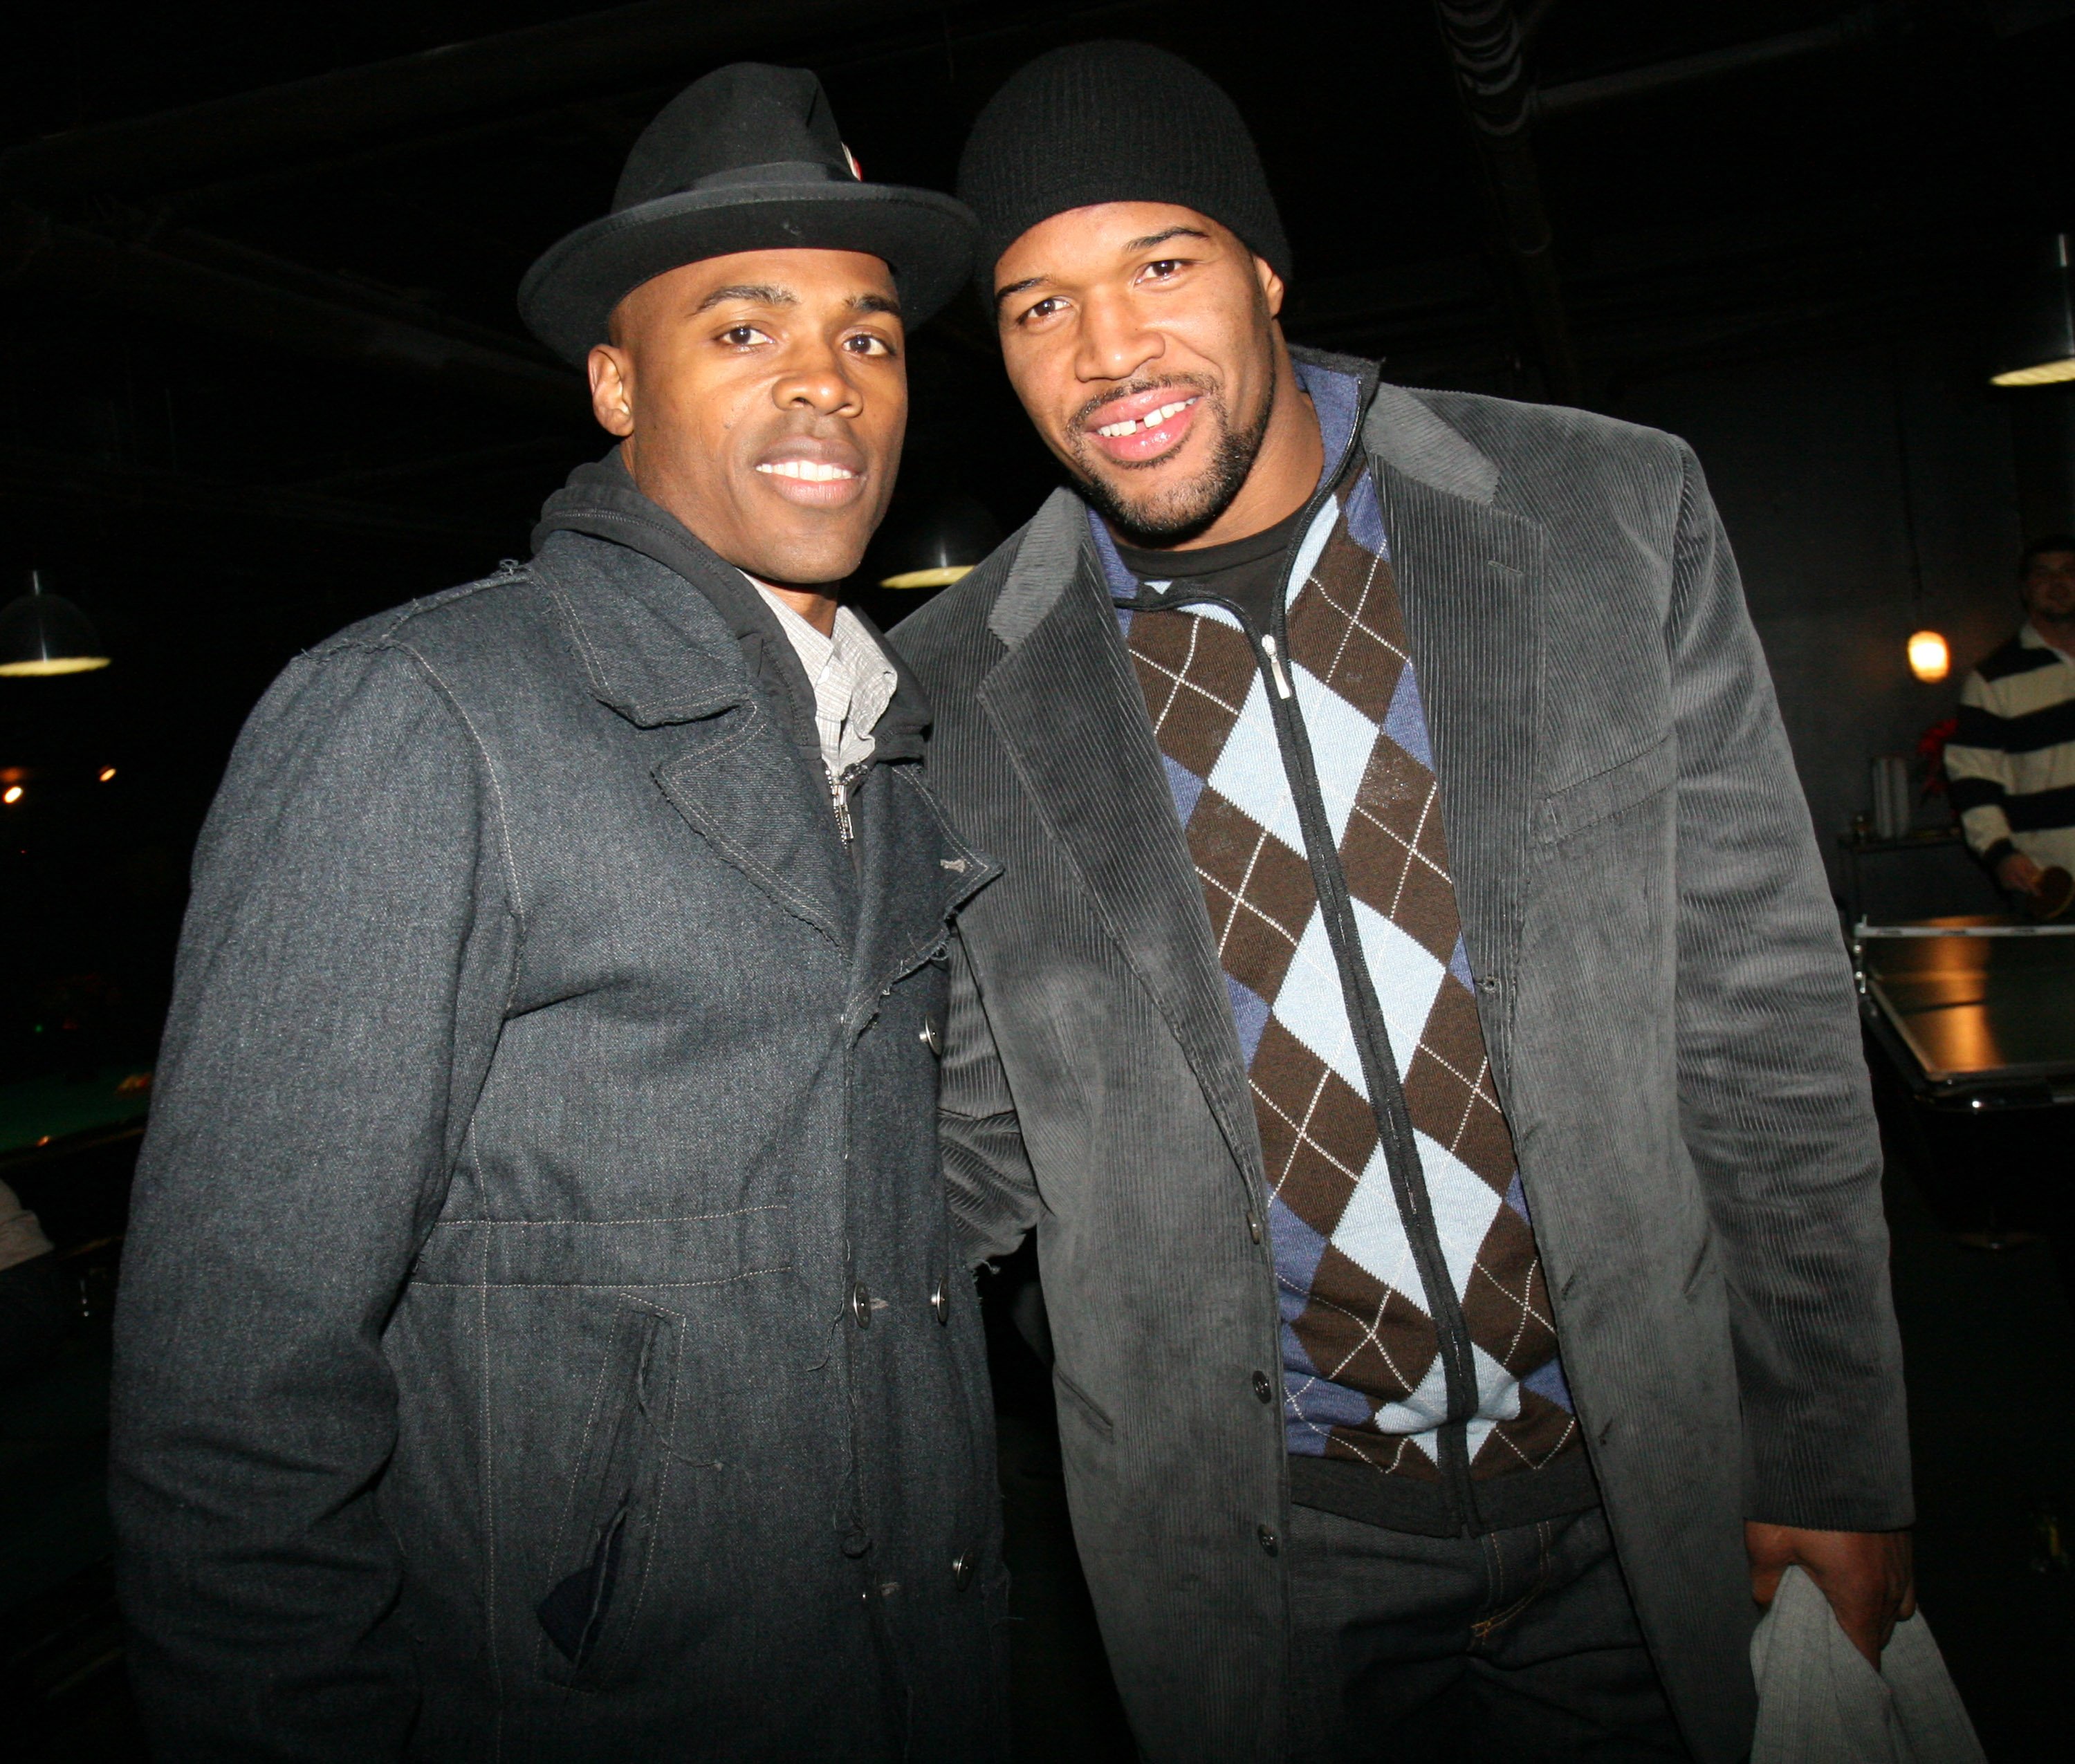 Dr. Ian Smith and Michael Strahan at Strahan's Santa's BIG Helper Christmas Party on December 17, 2007, in New York City. | Source: Johnny Nunez/WireImage/Getty Images